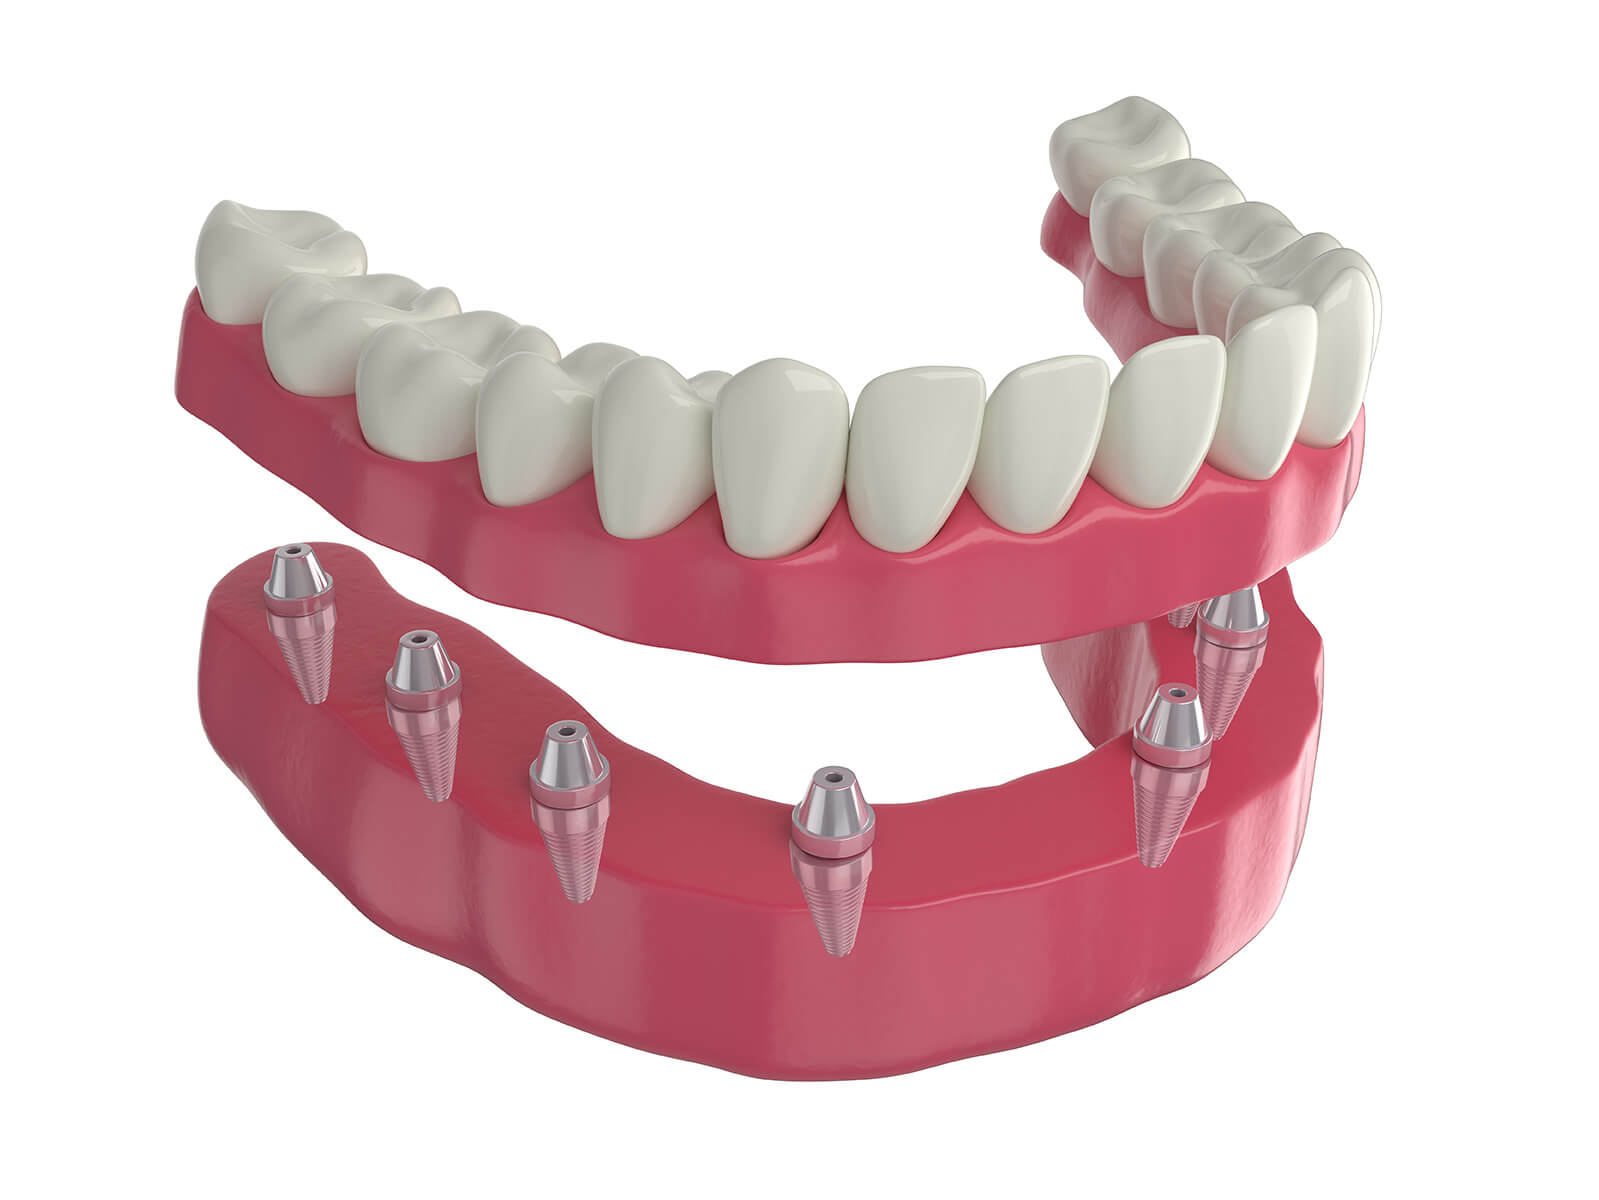 Removable Dentures With Implants & How They Work